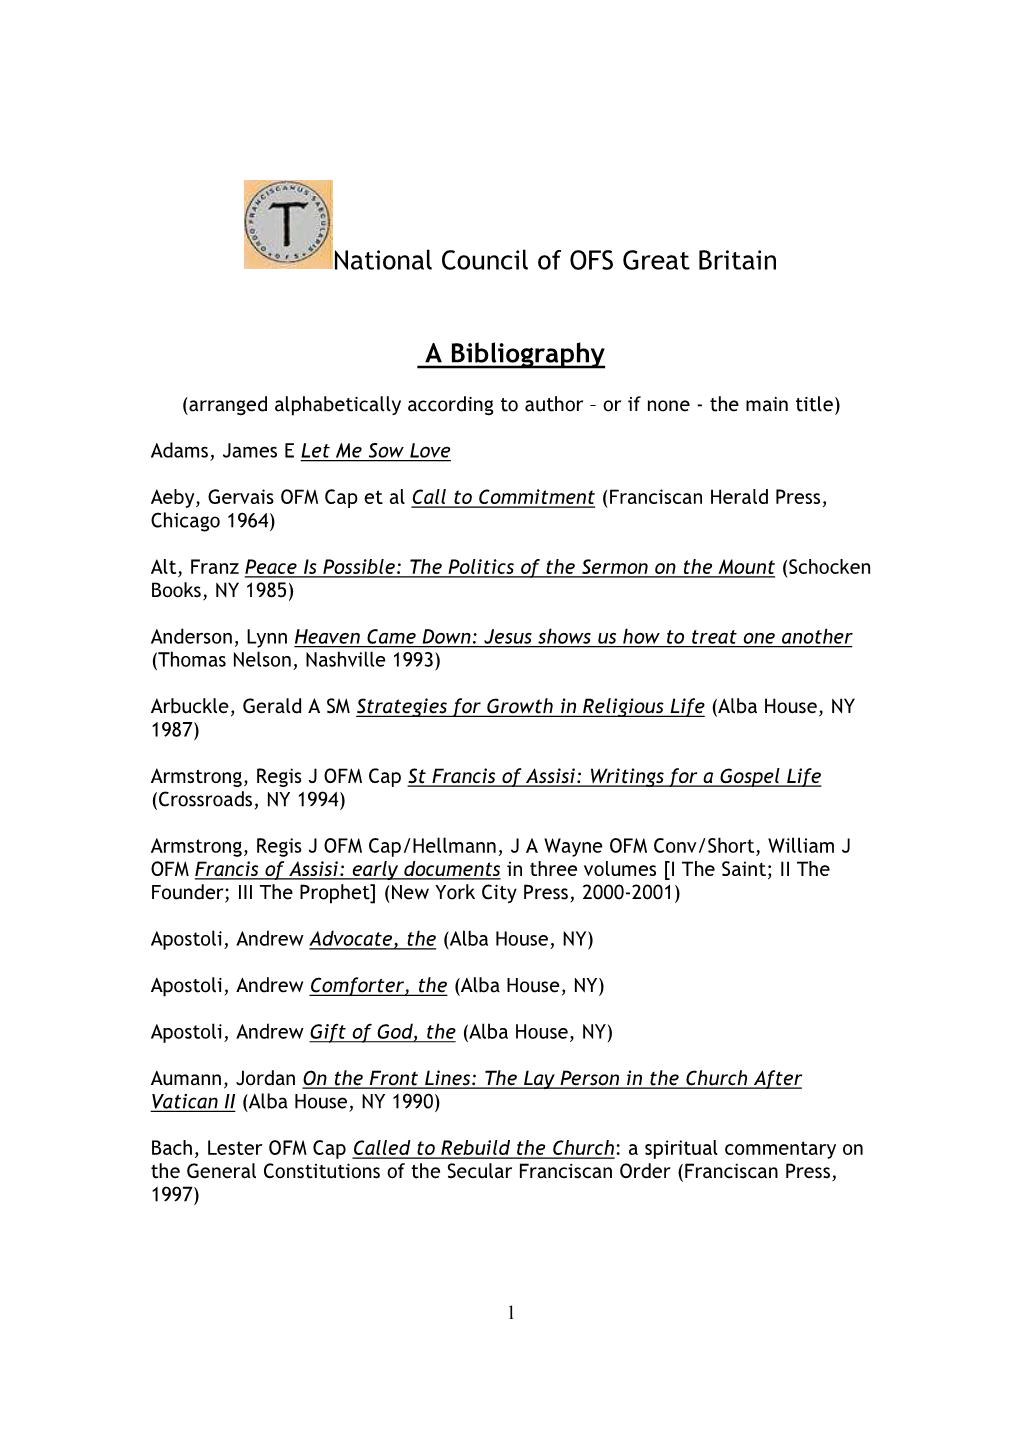 National Council of OFS Great Britain a Bibliography